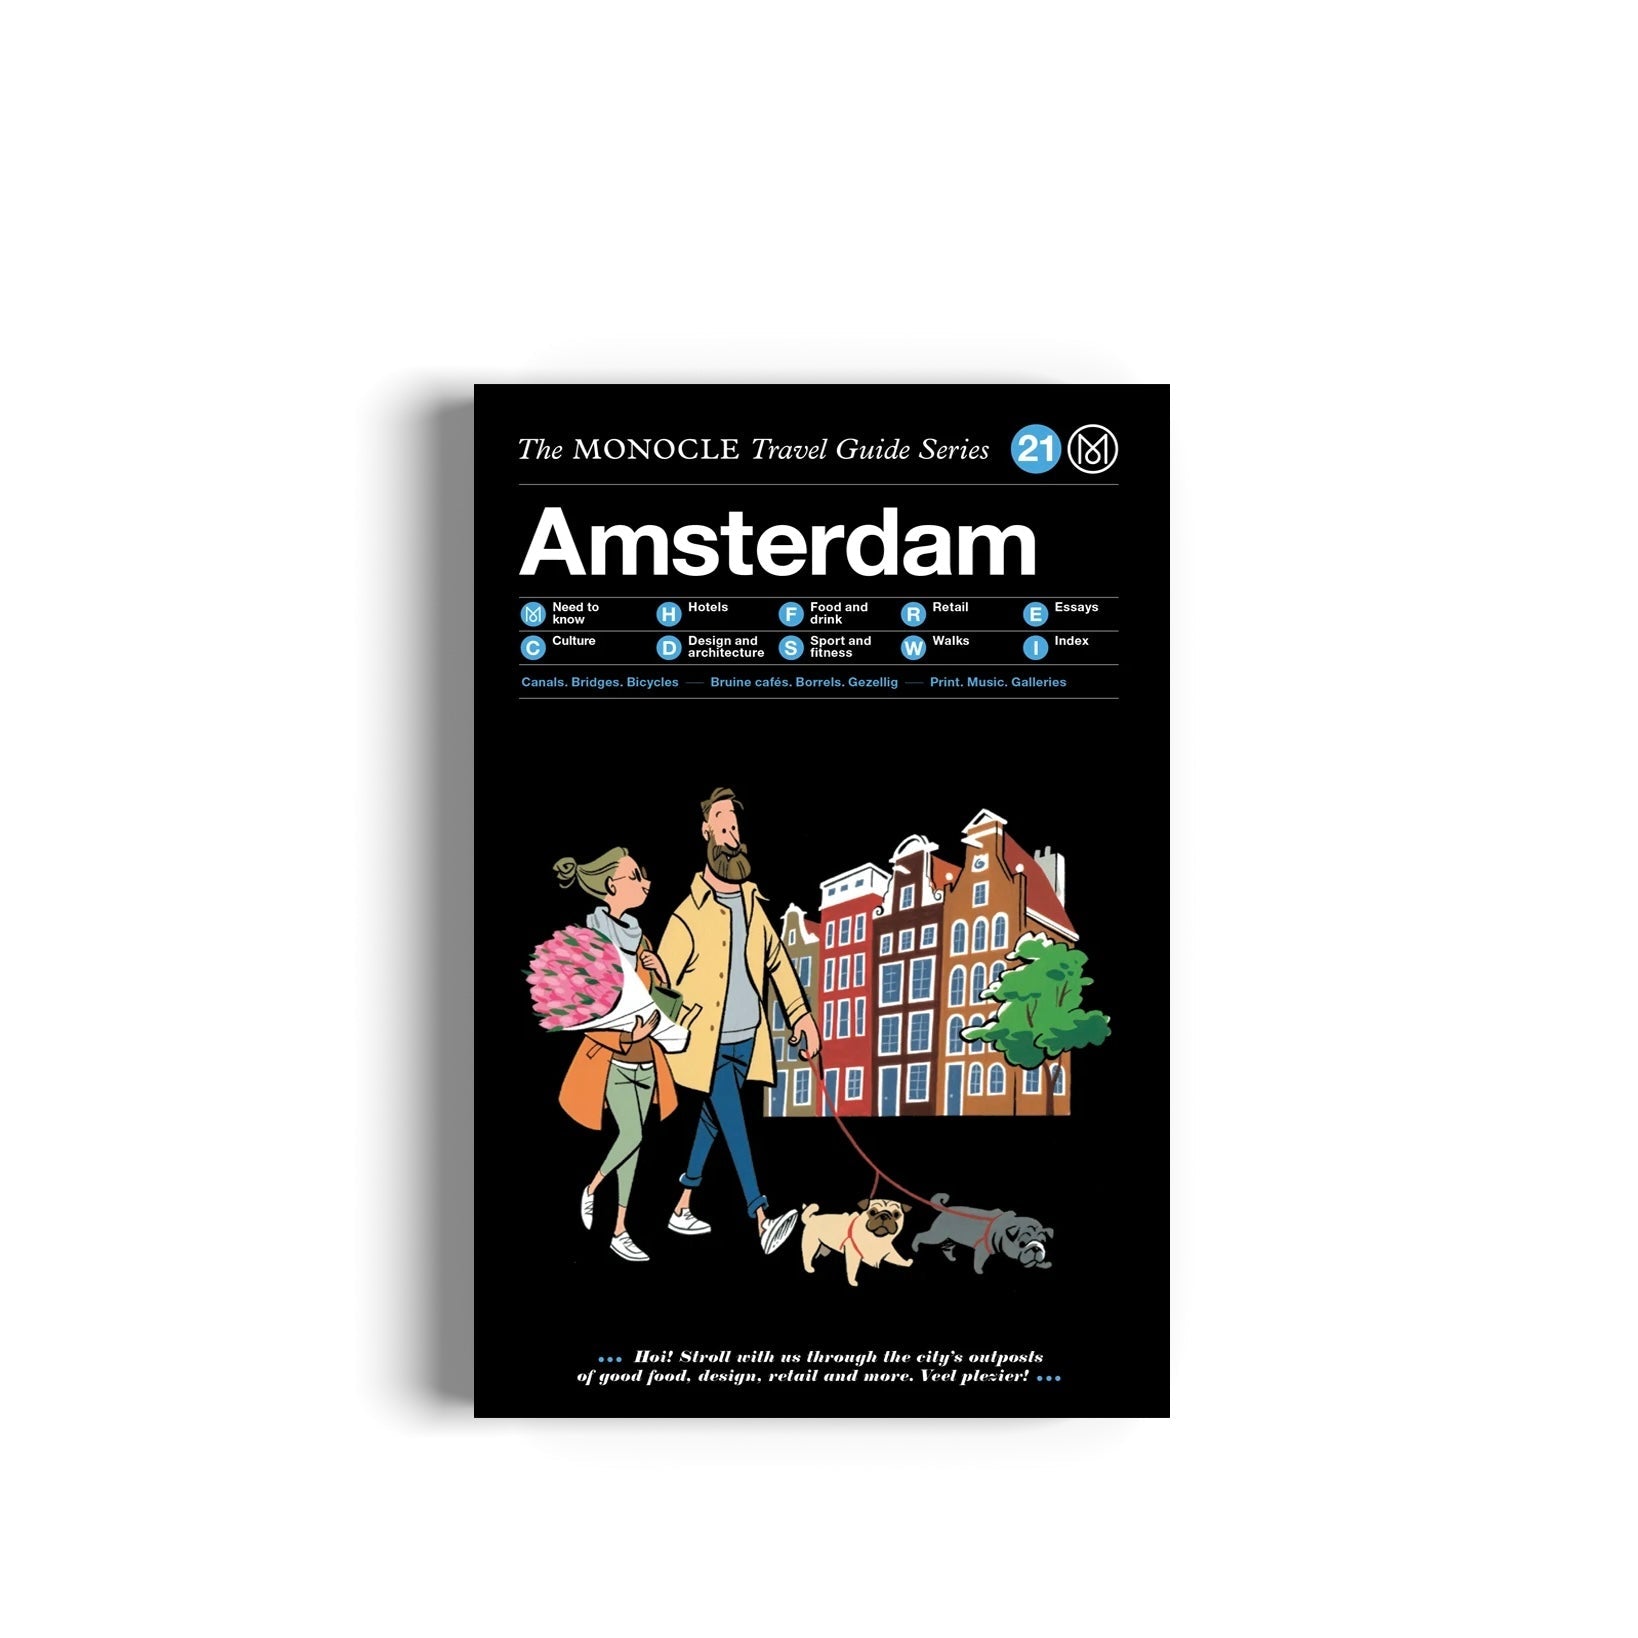 AMSTERDAM: THE MONOCLE TRAVEL GUIDE SERIES (UPDATED VERSION)